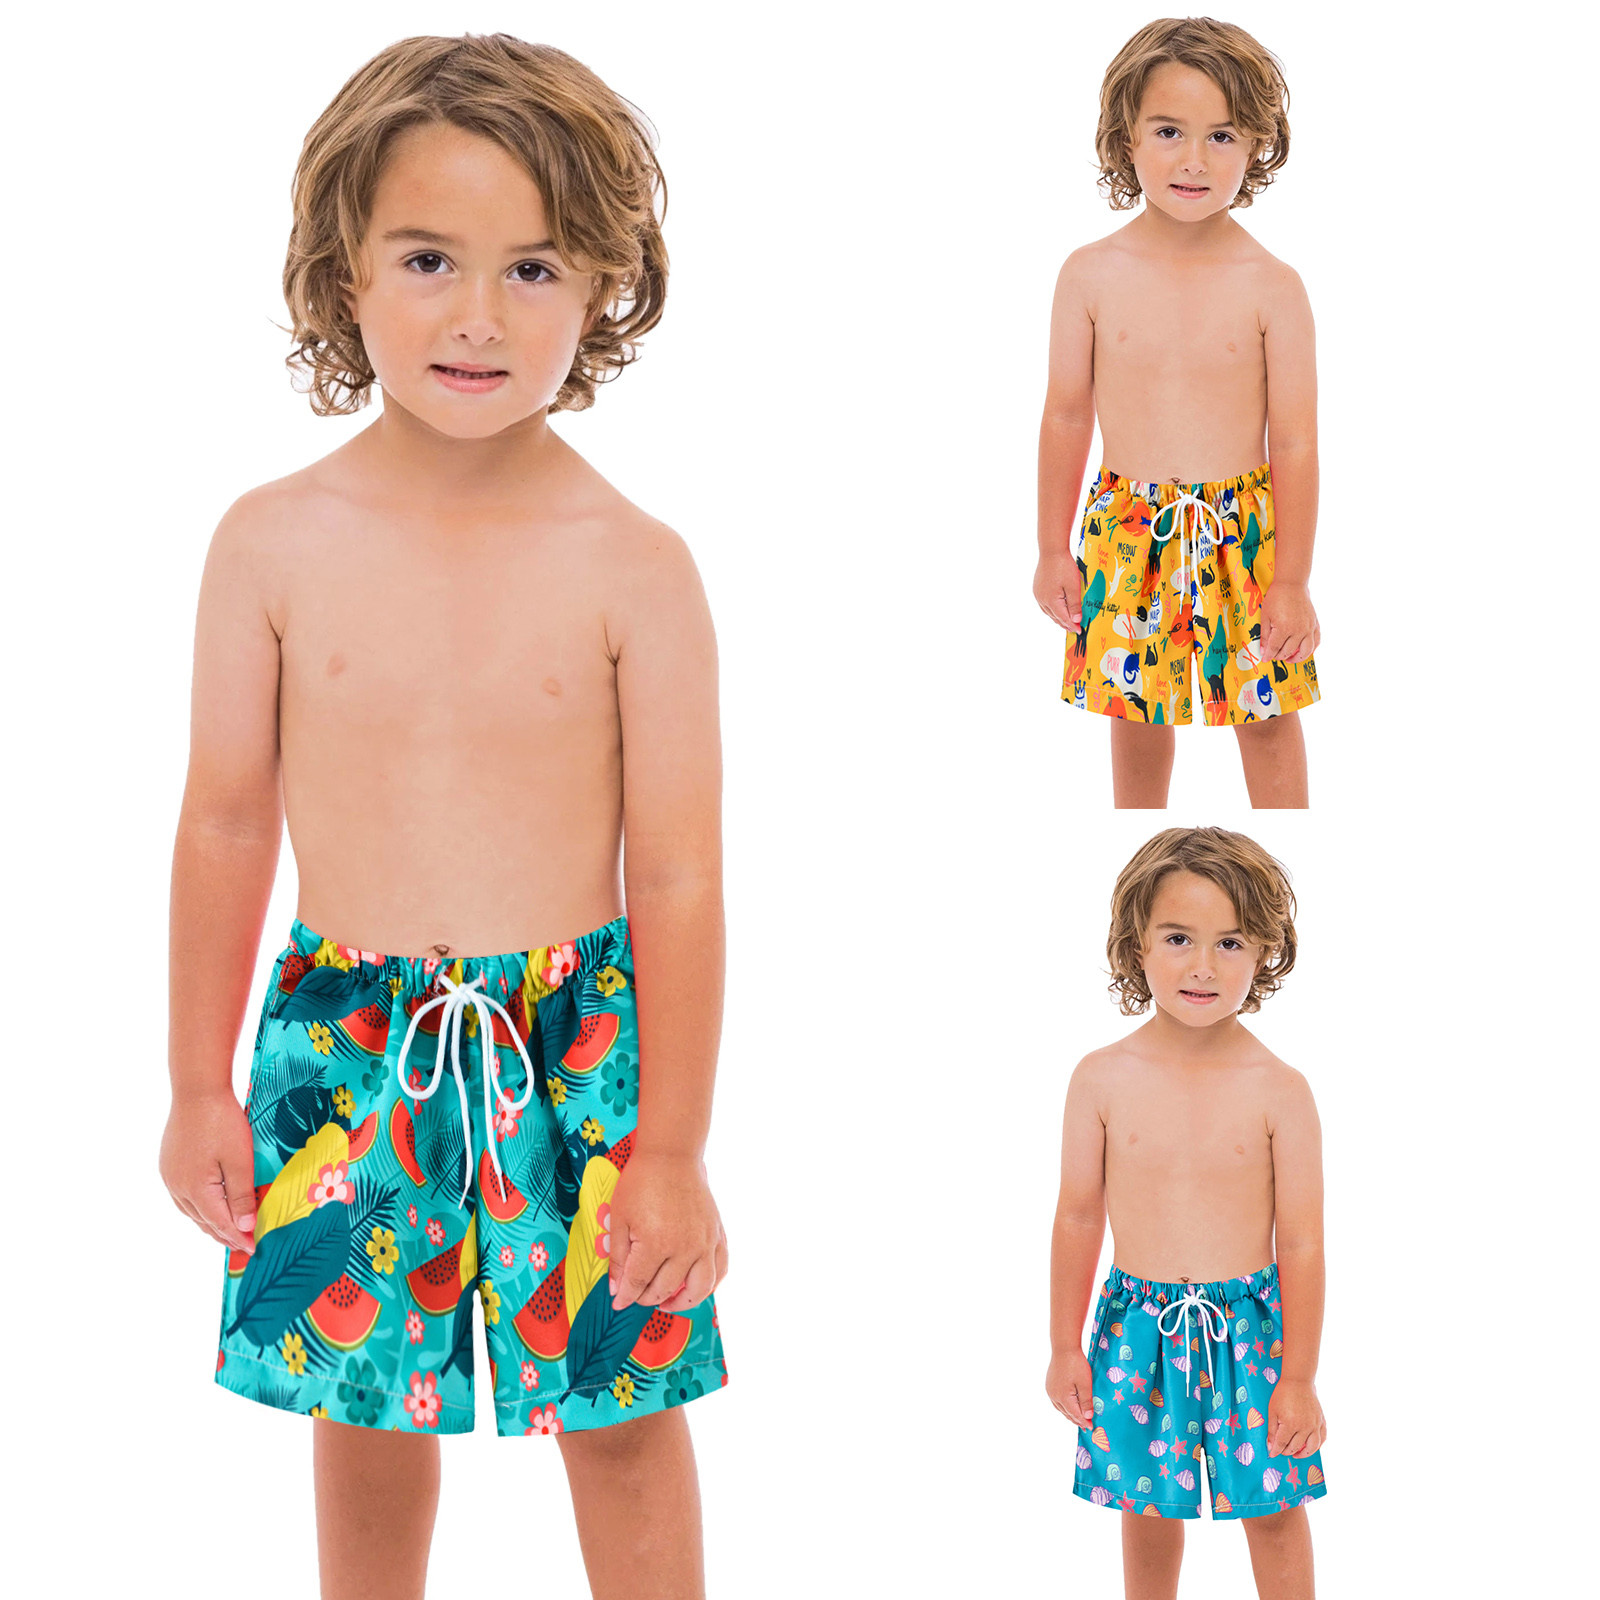 Boys Two Pieces Swimsuit Kids Toddler Baby Infant Swim Swimsuit Cartoon